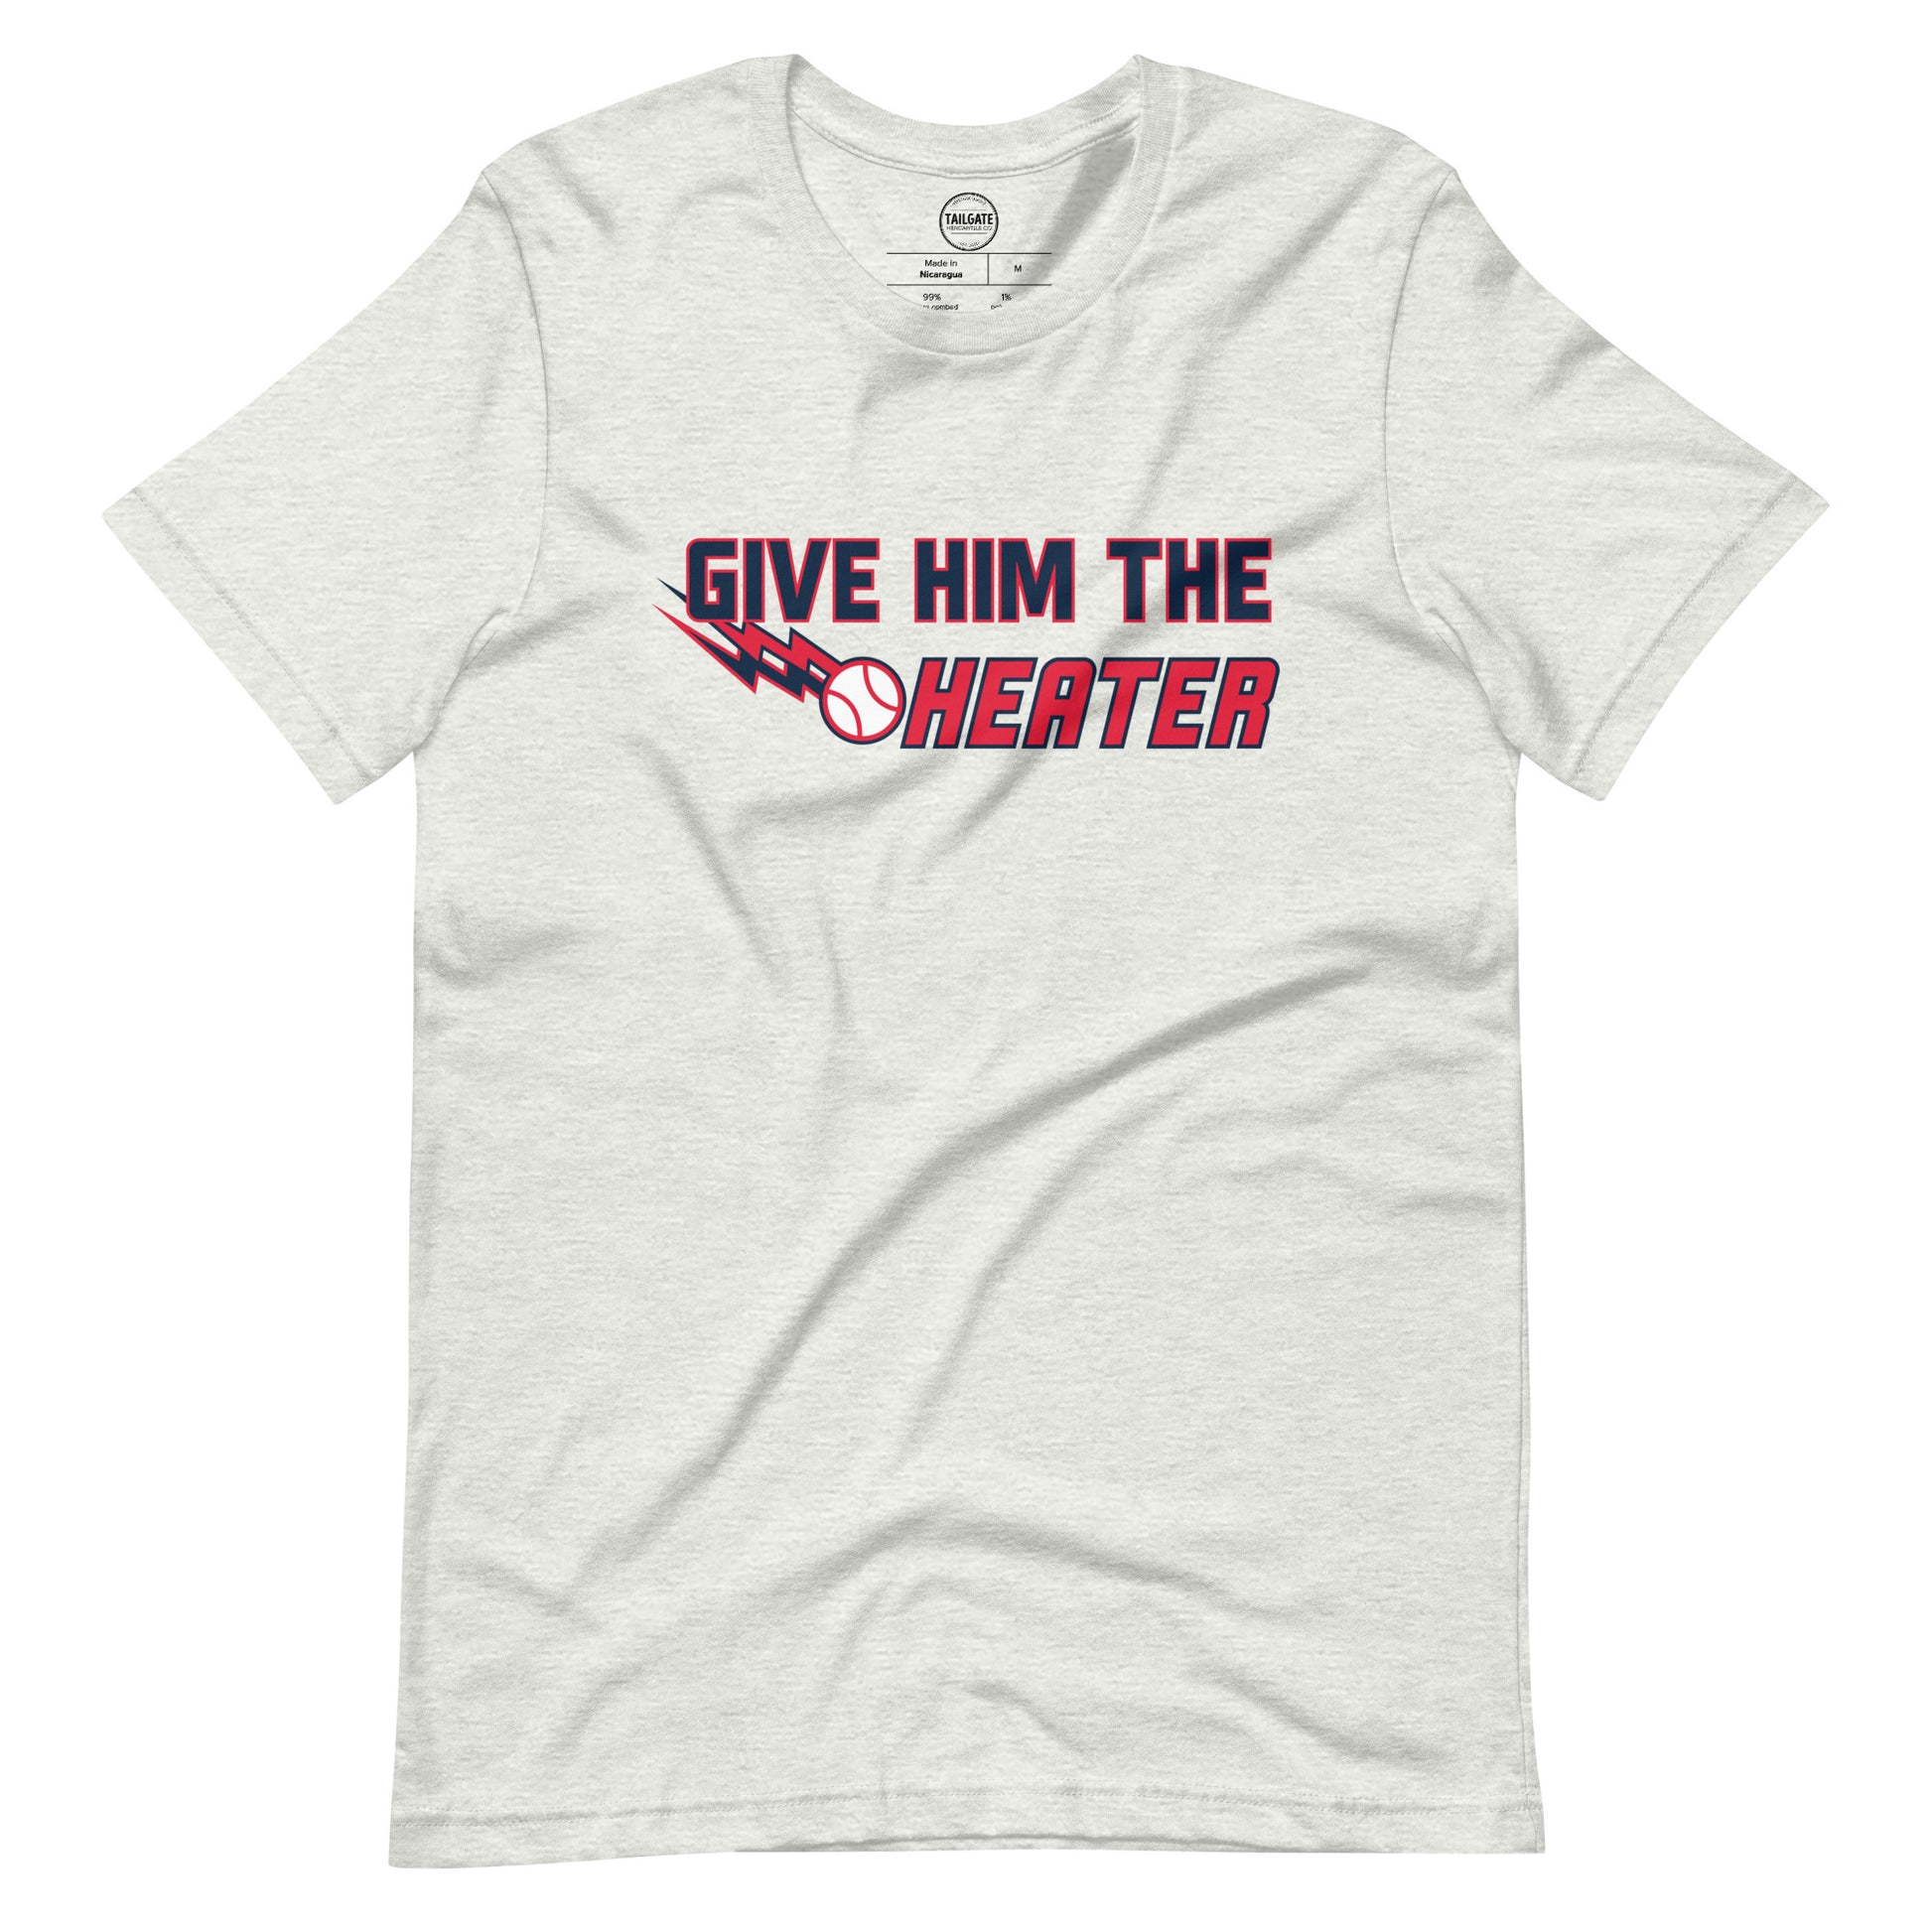 Image of heather ash t-shirt with design of "Give Him The Heater" in navy/red/white located on centre chest. Throw Him The Heater is an homage to the great baseball movie "Major League". This design is exclusive to Tailgate Mercantile and available only online.